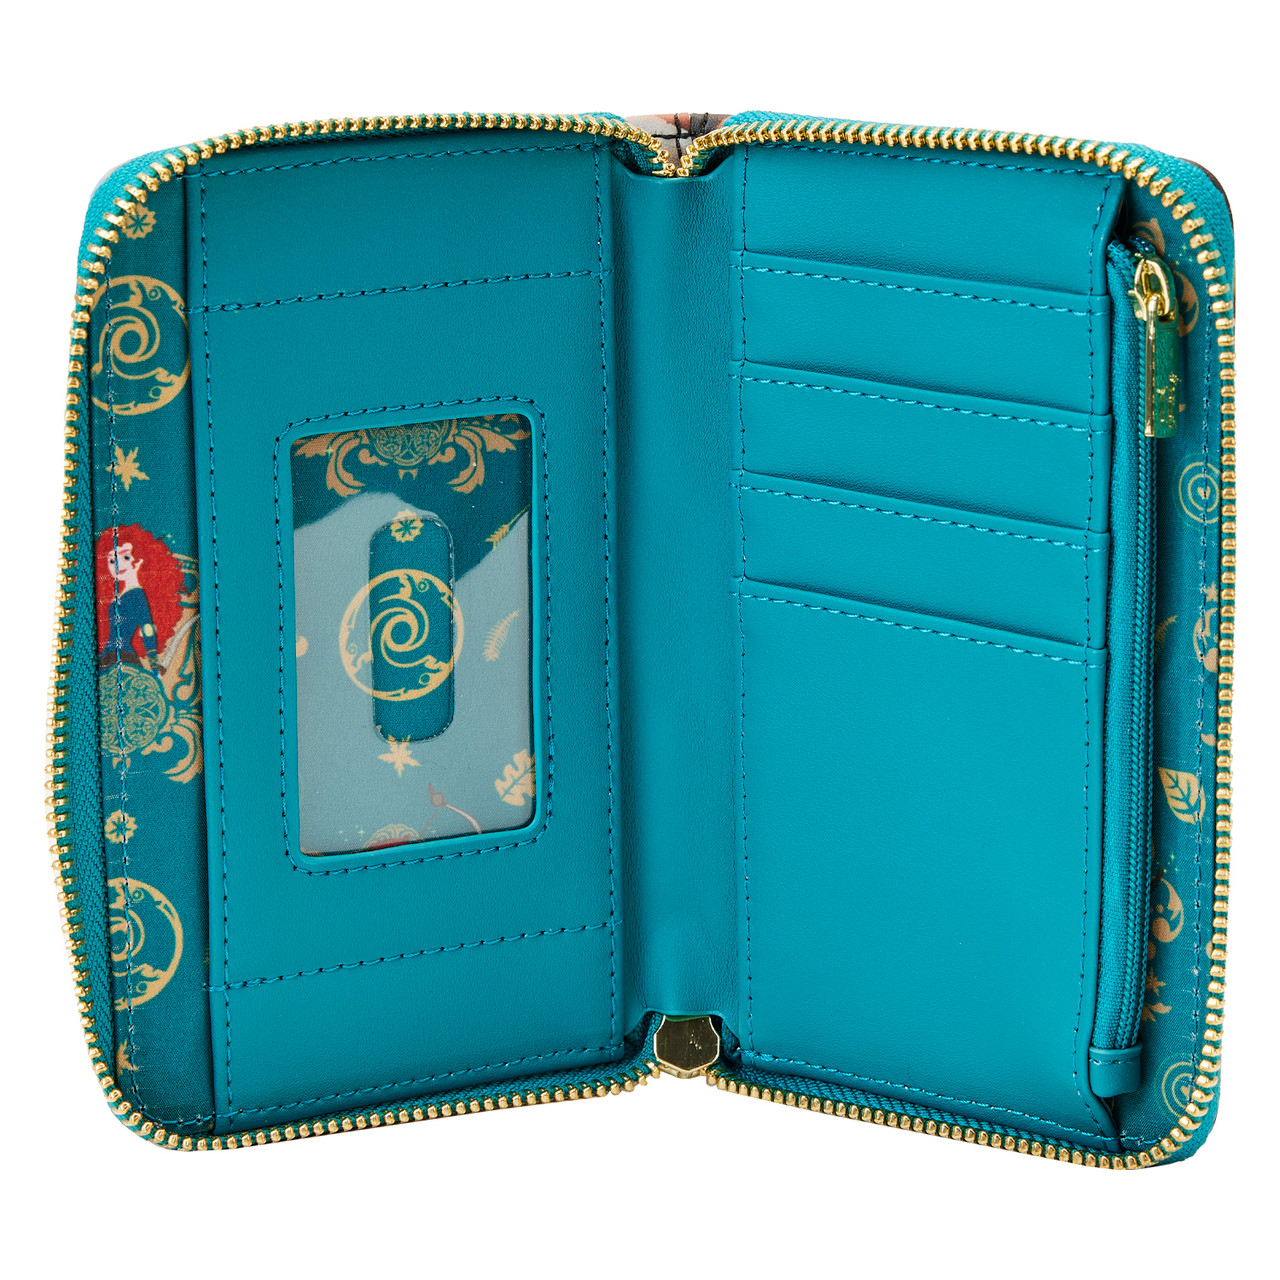 Loungefly Fairy Wallets for Women